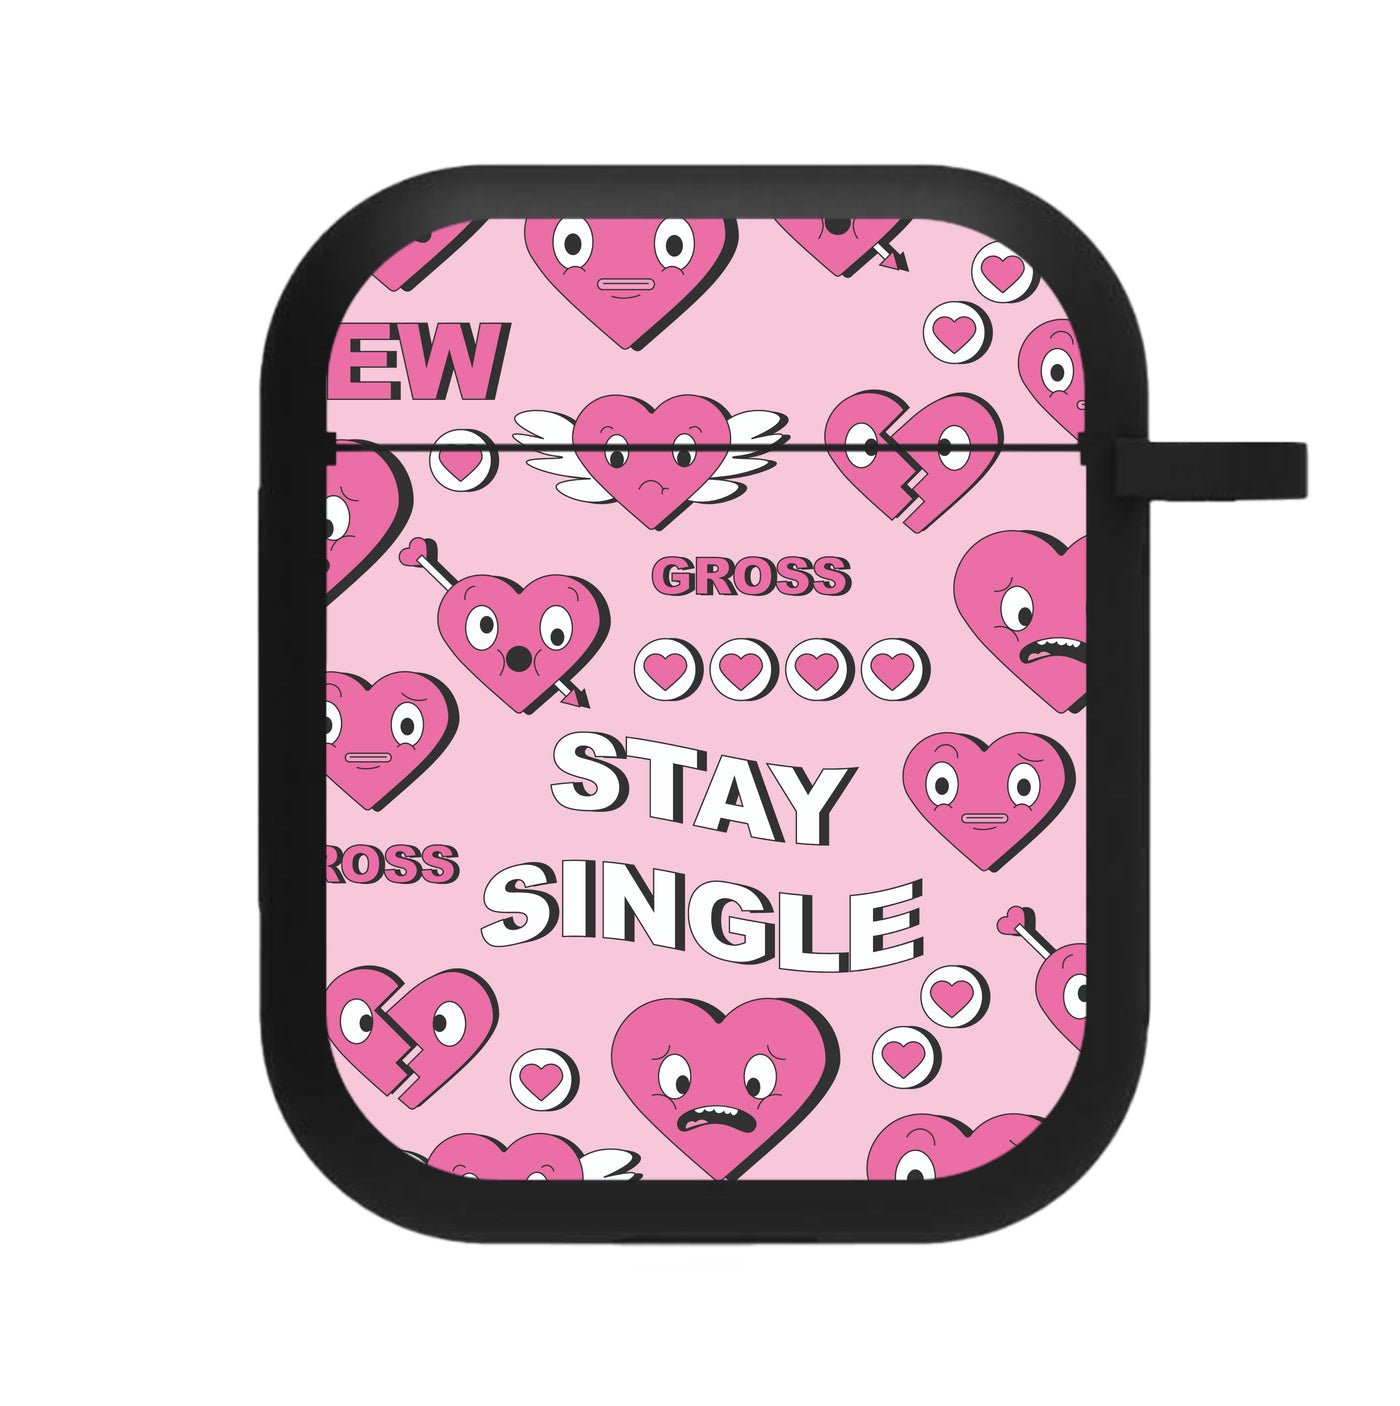 Stay Single - Valentine's Day AirPods Case